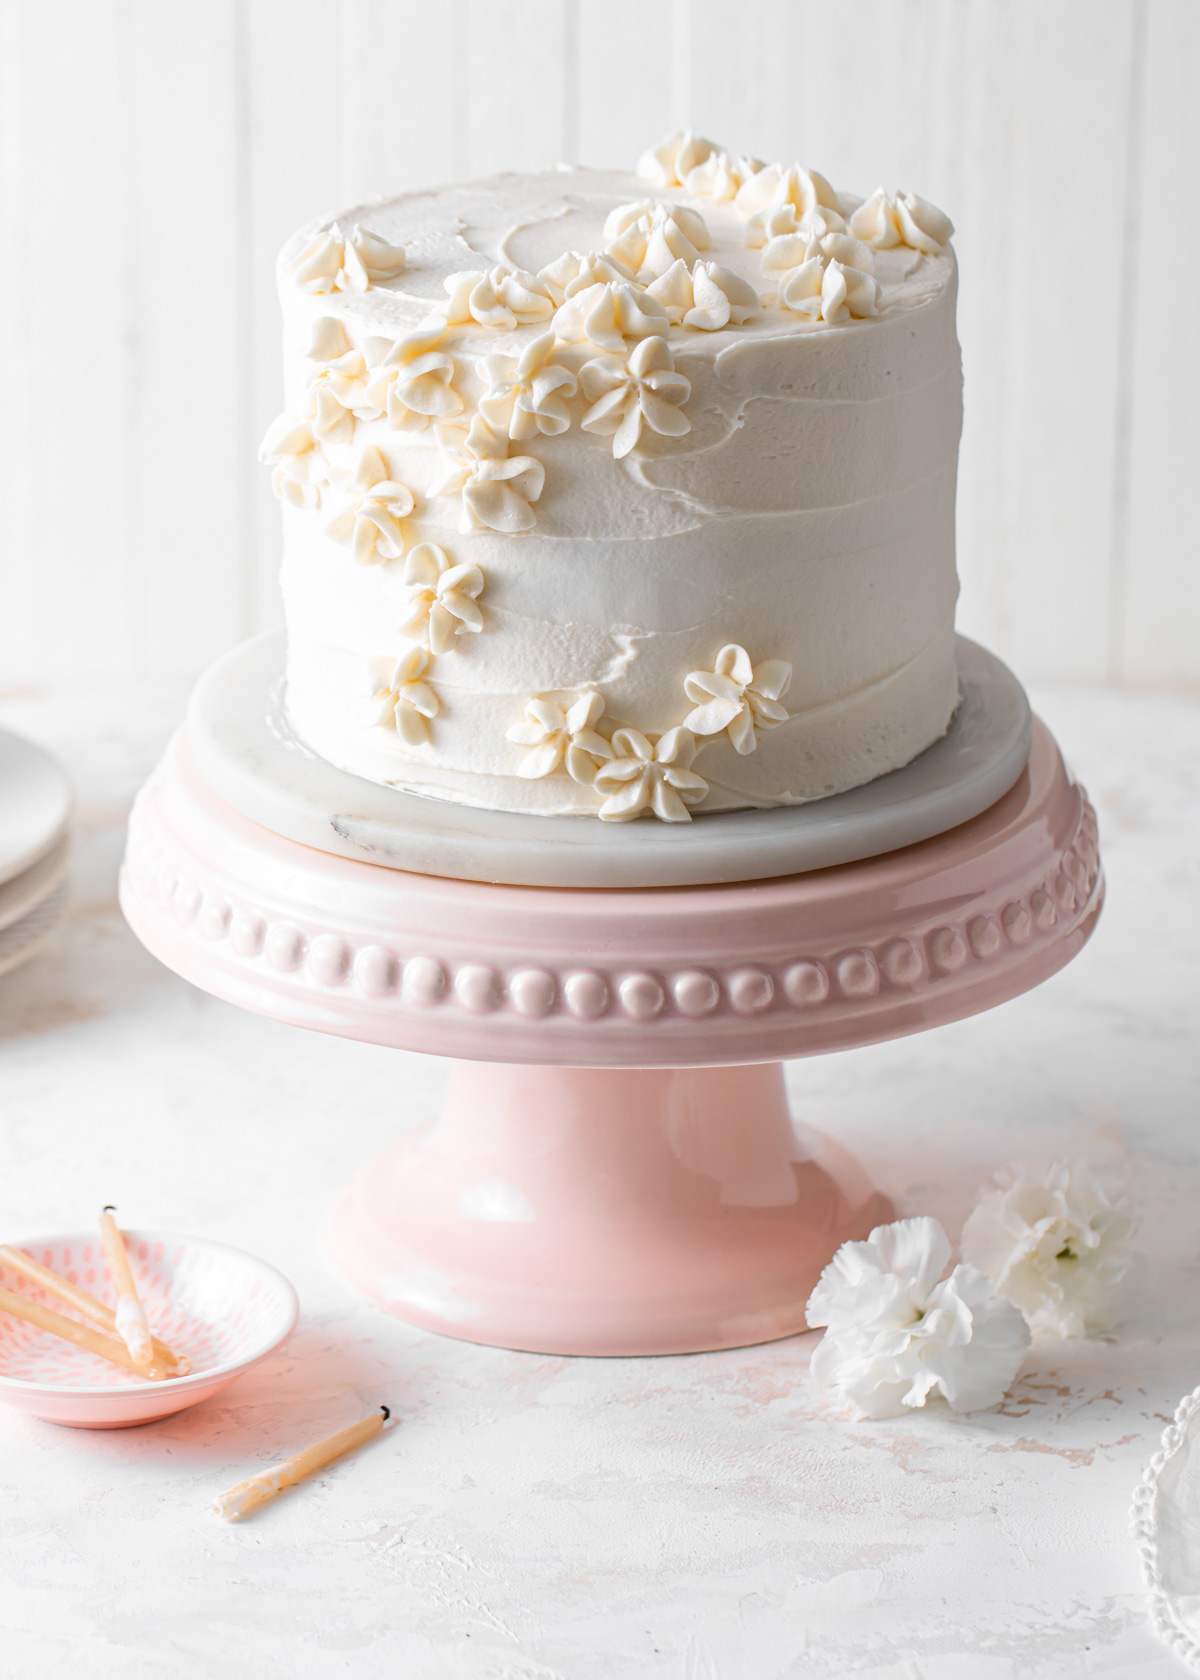 A 6-inch vanilla layer cake with piped vanilla frosting on a pink cake stand.